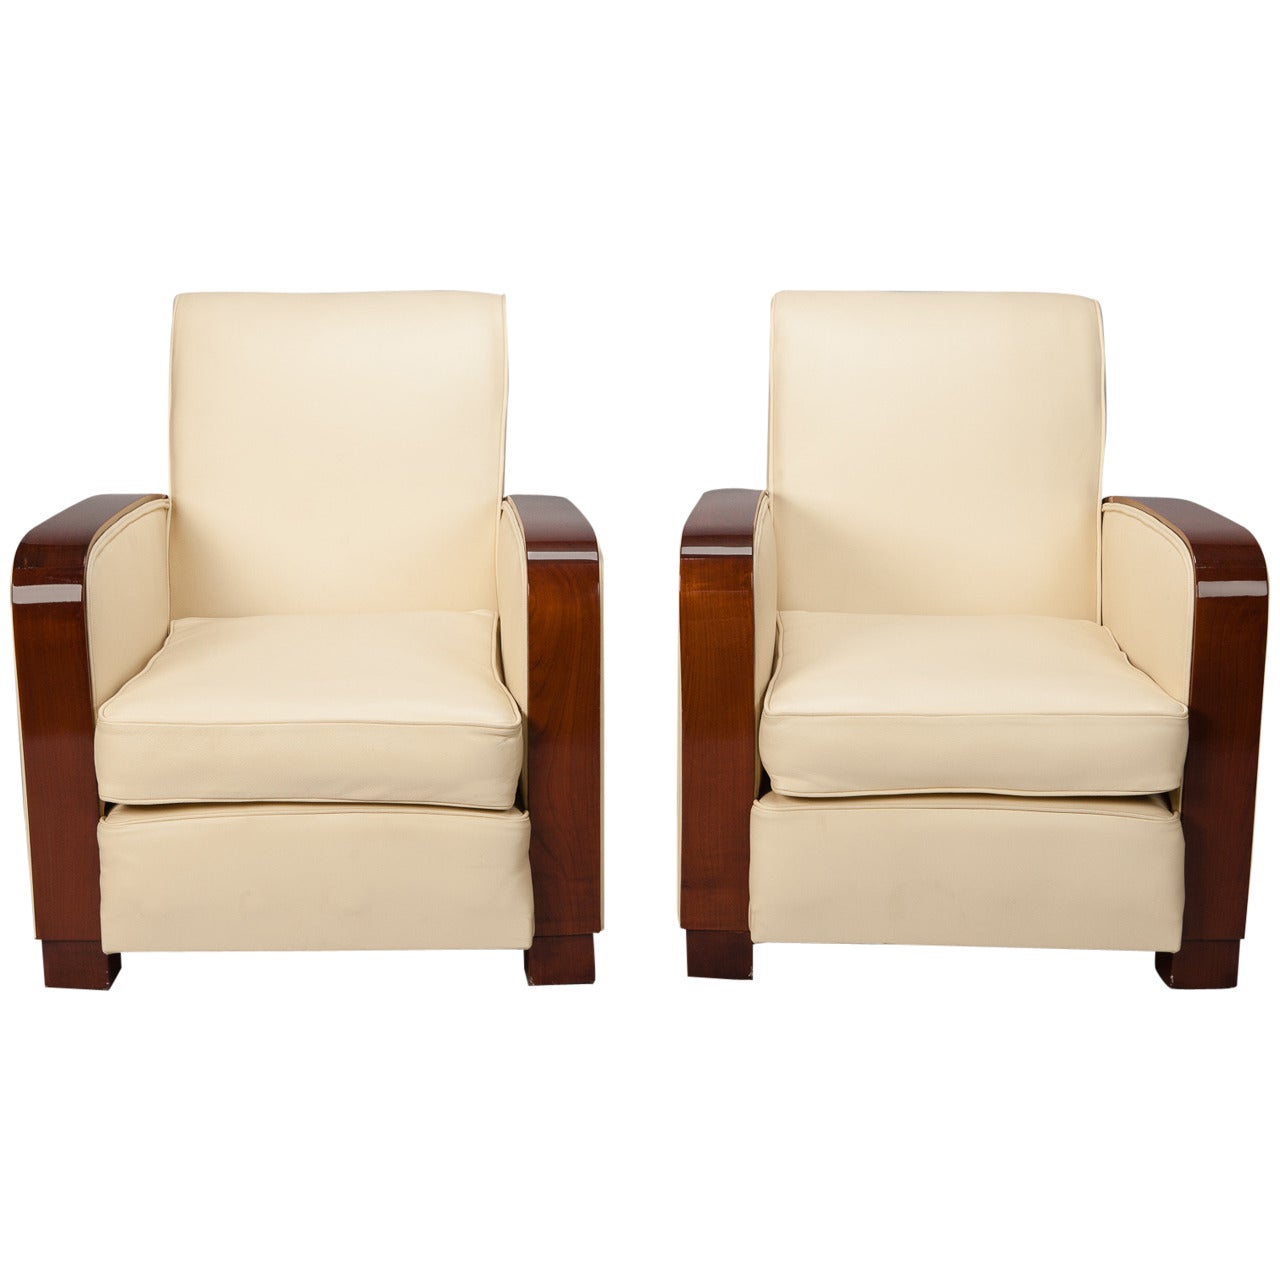 Pair Art Deco Leather Club Chairs With Polished Wood Arms